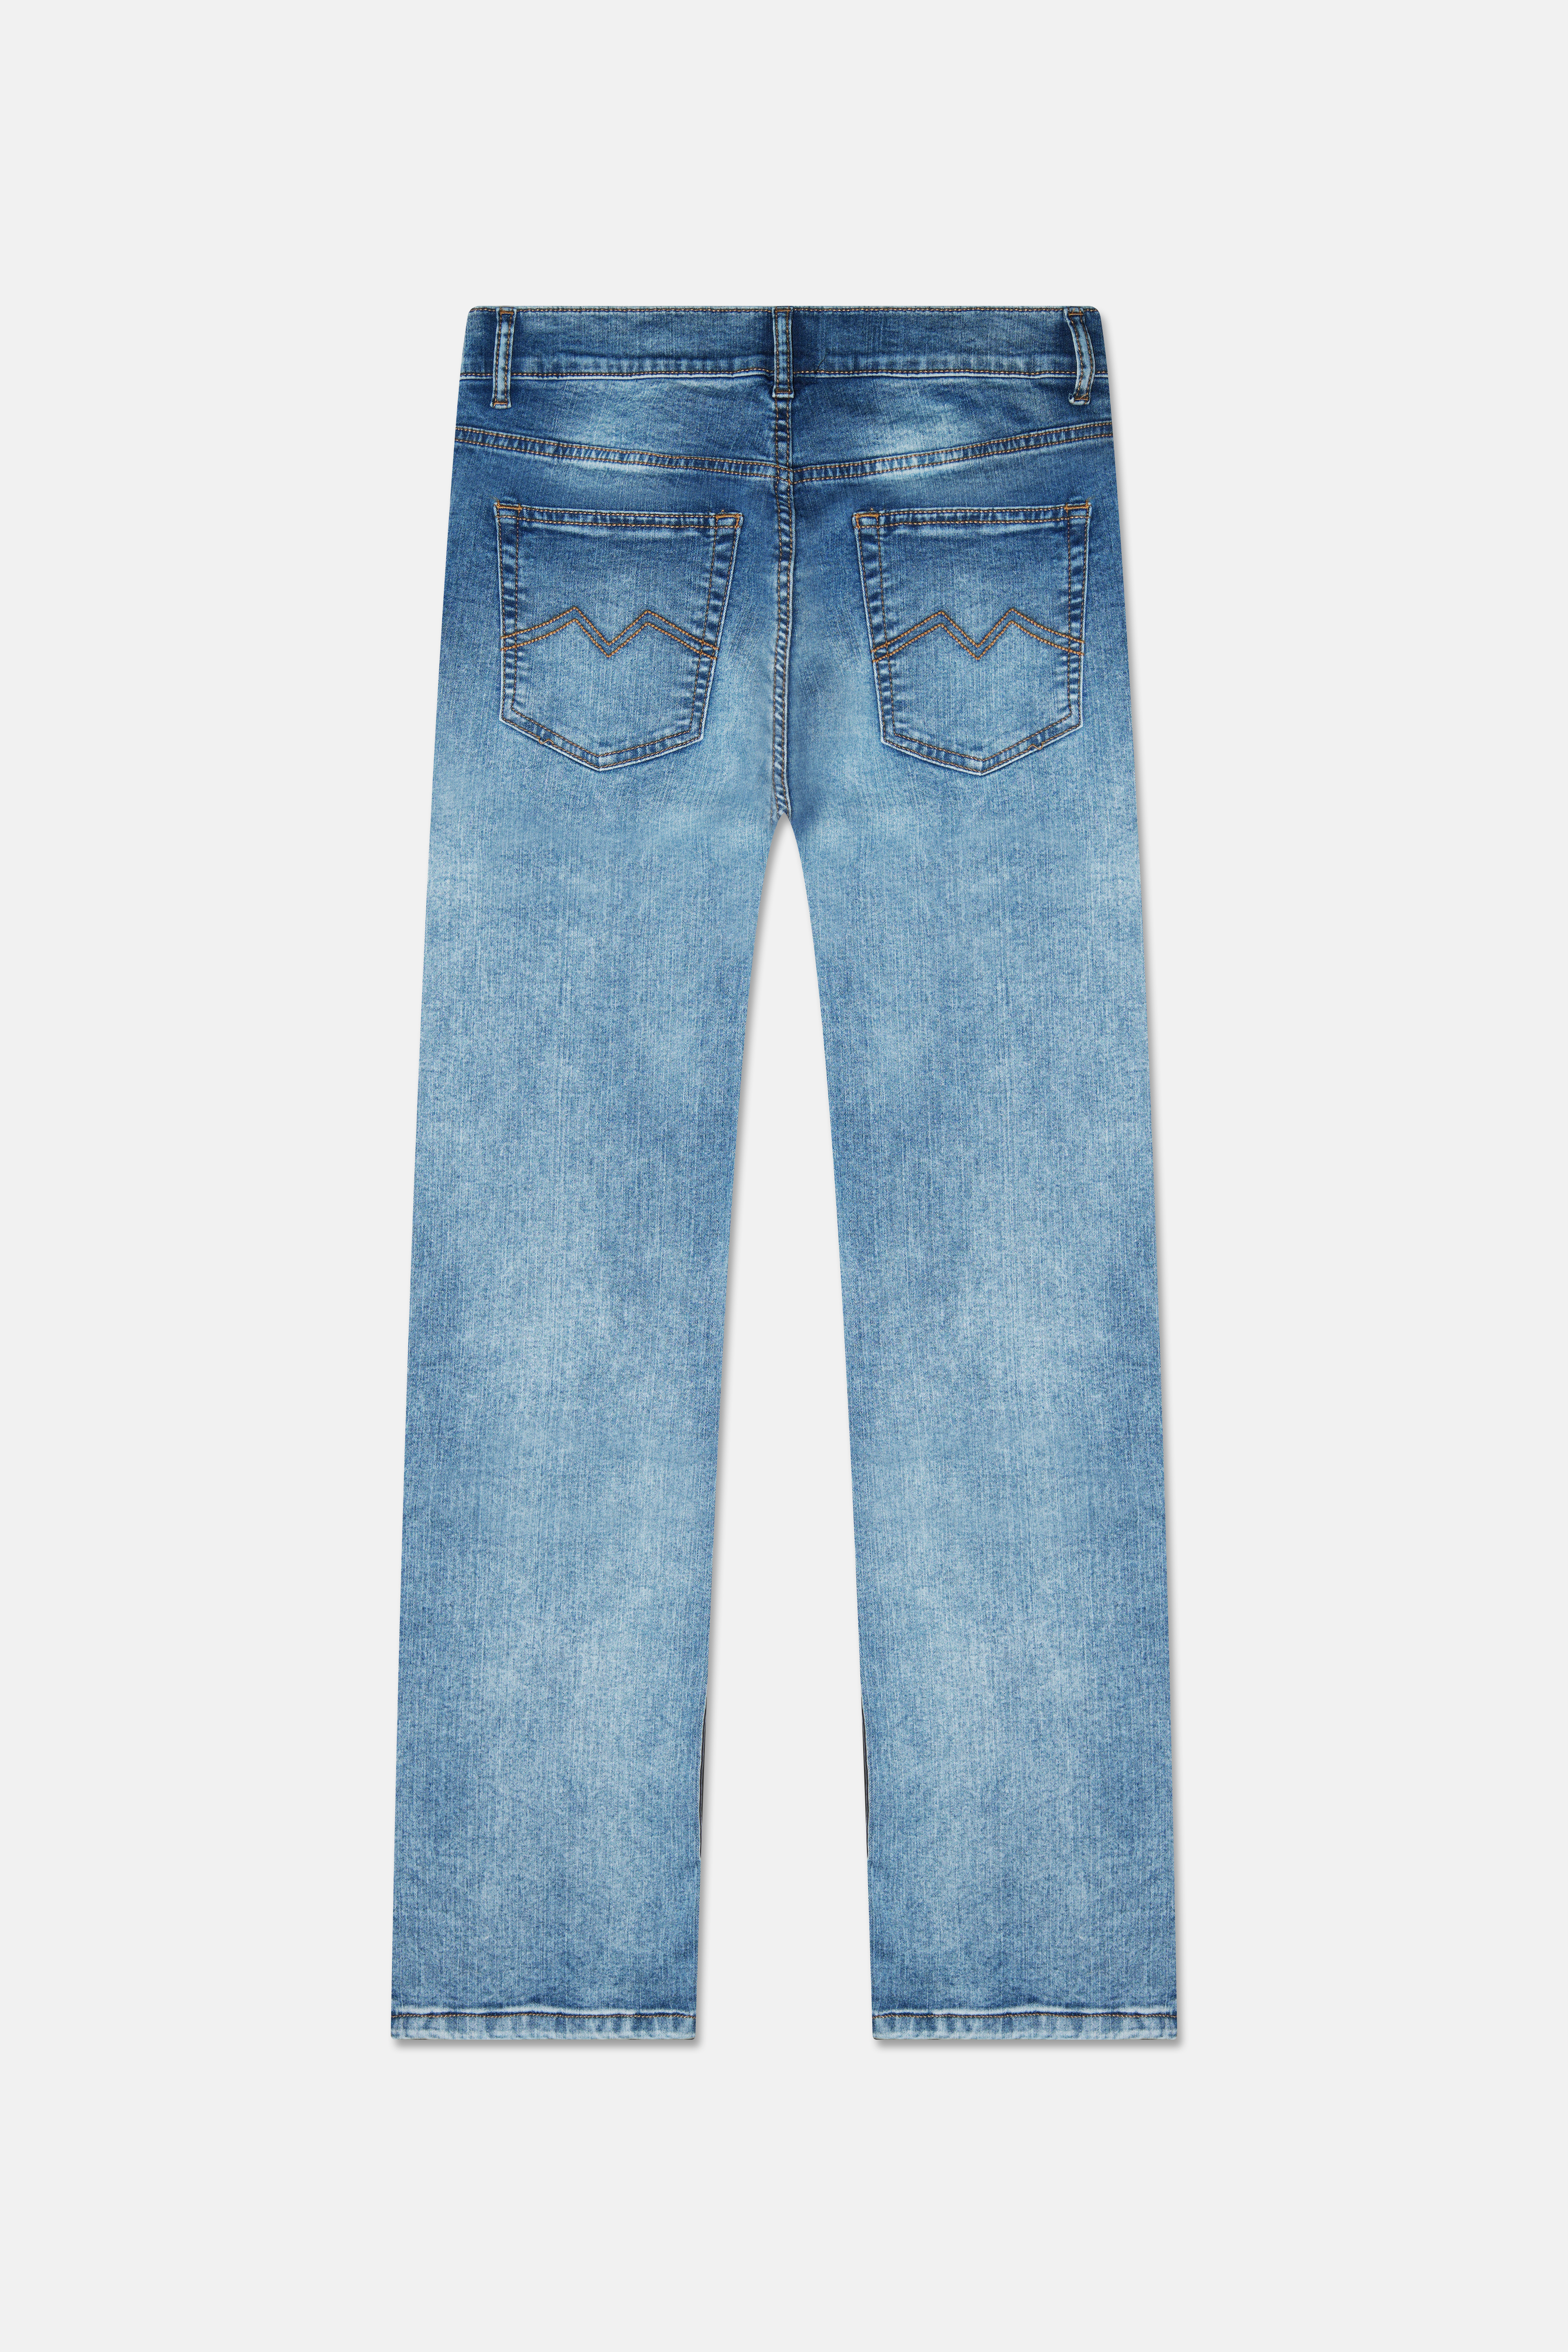 Stone Washed Blue Jeans